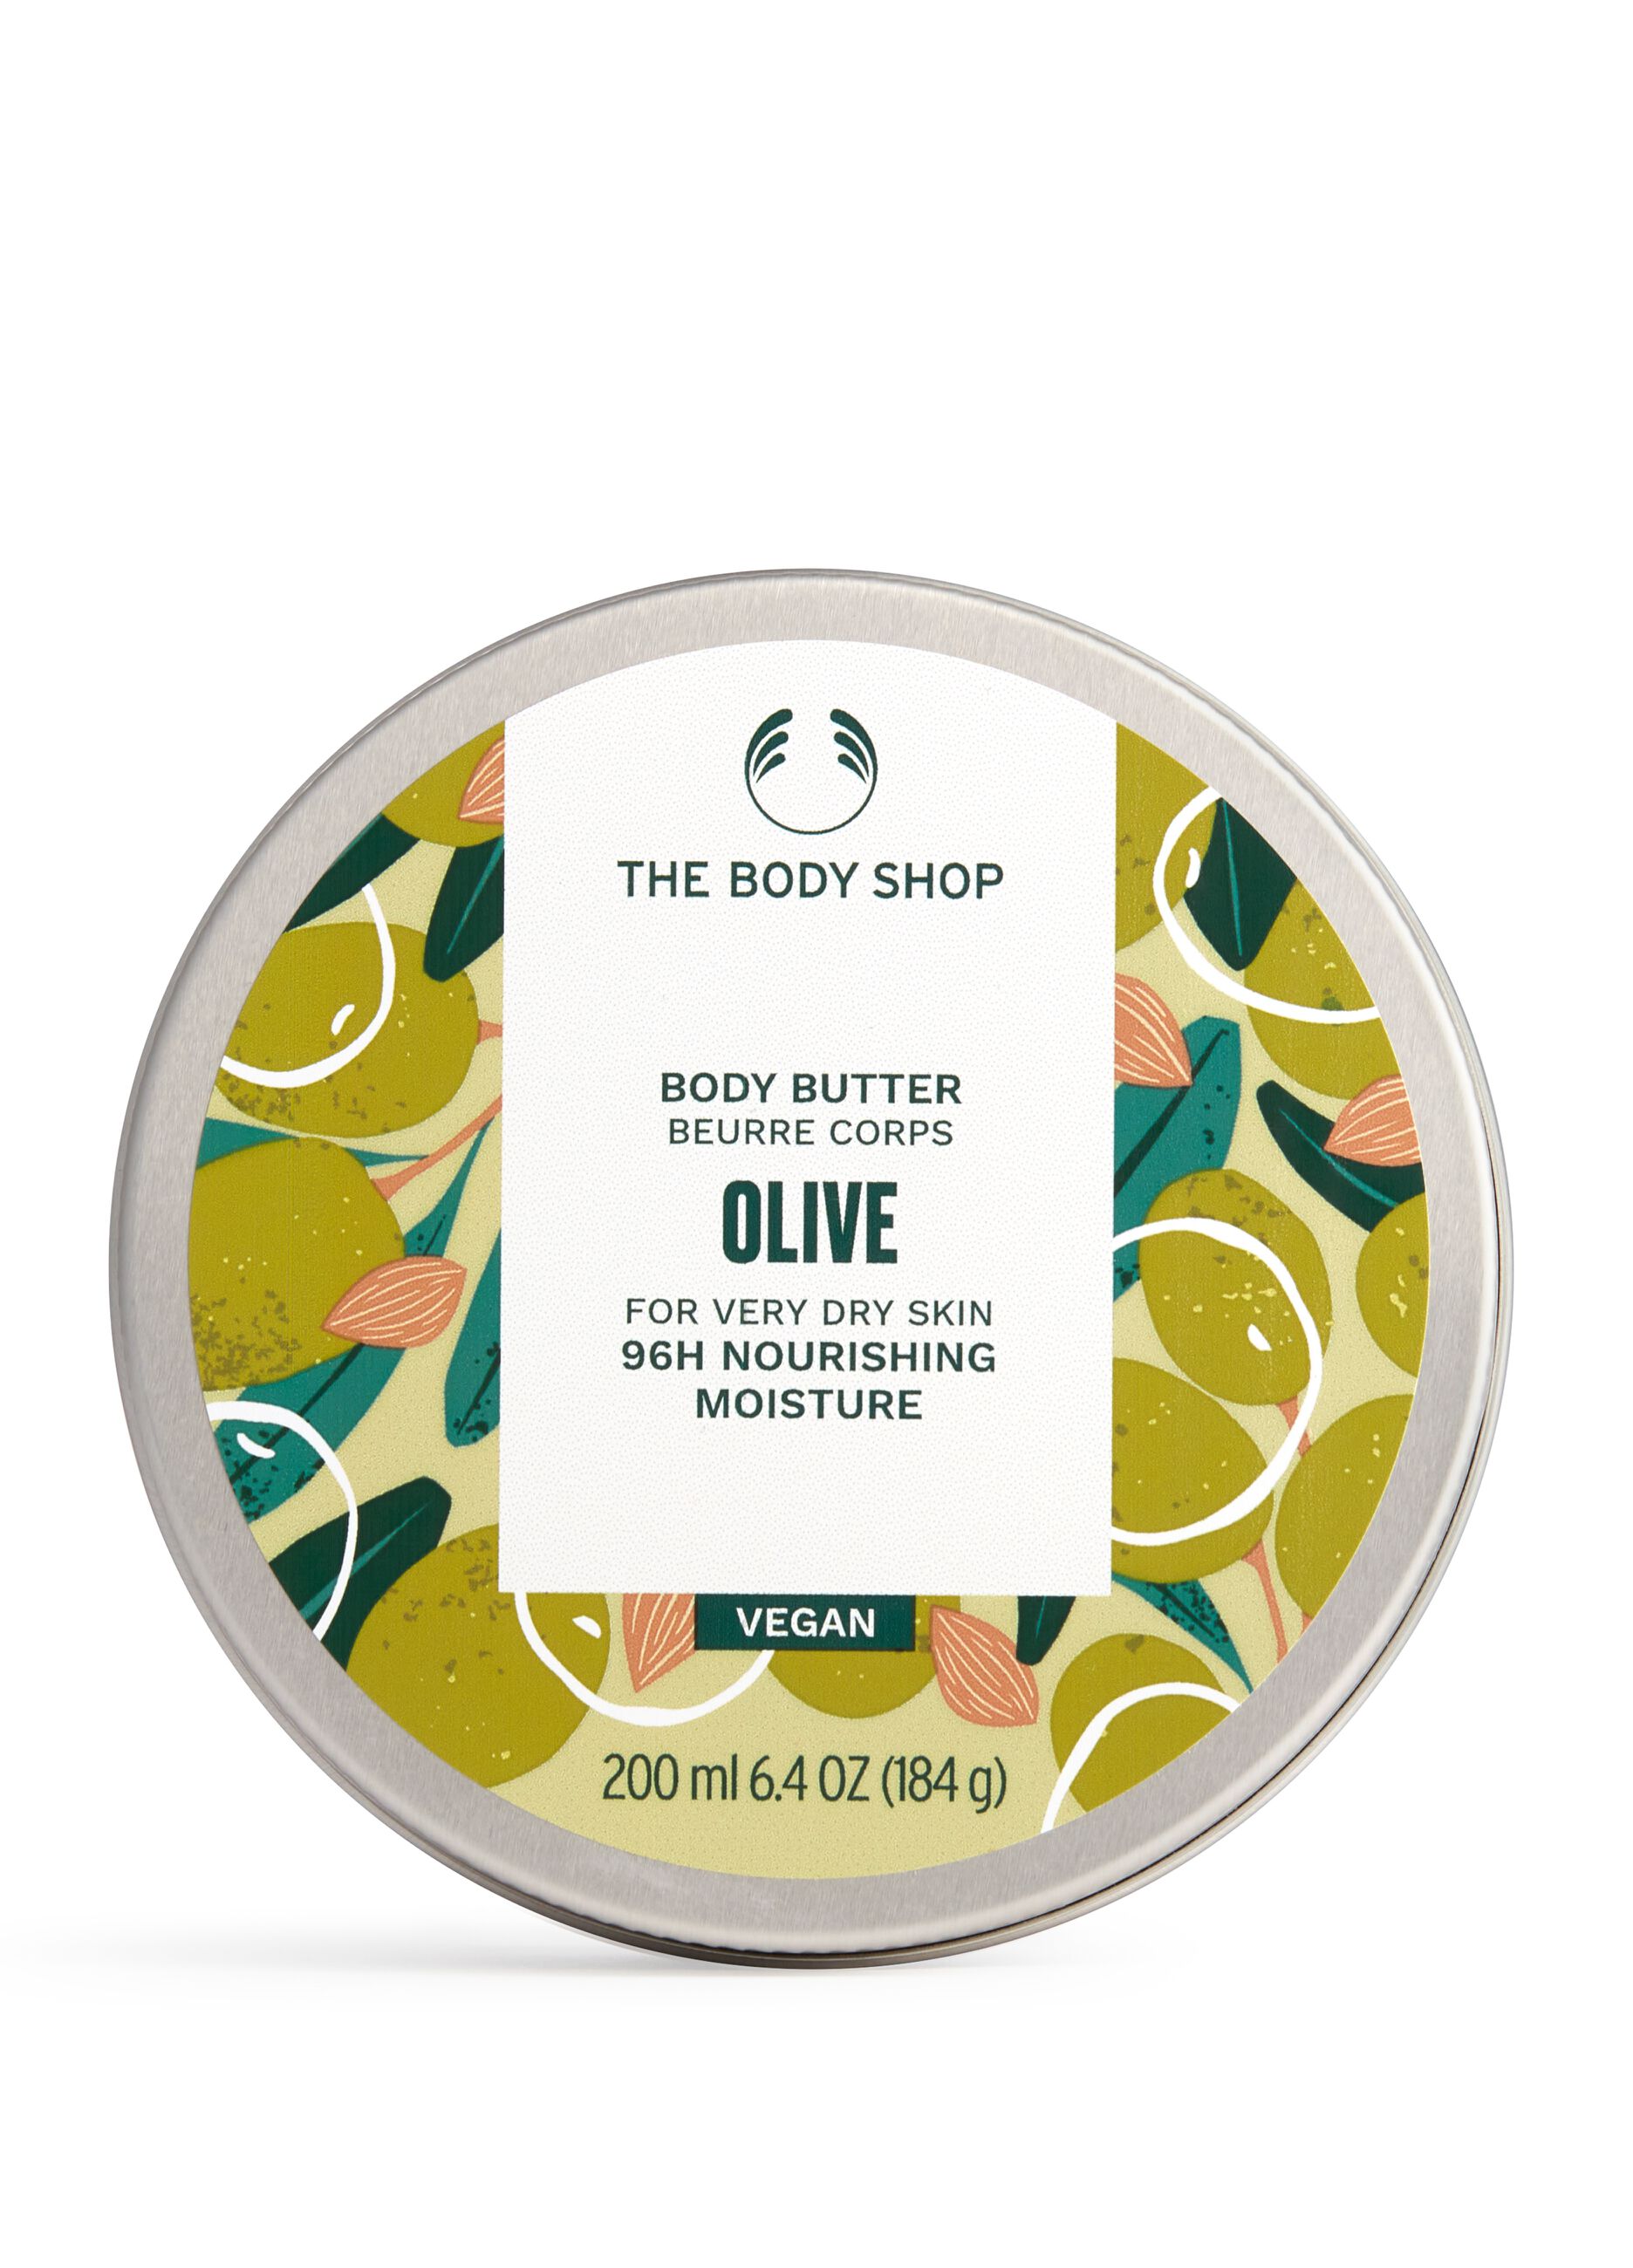 The Body Shop olive oil body butter 200ml